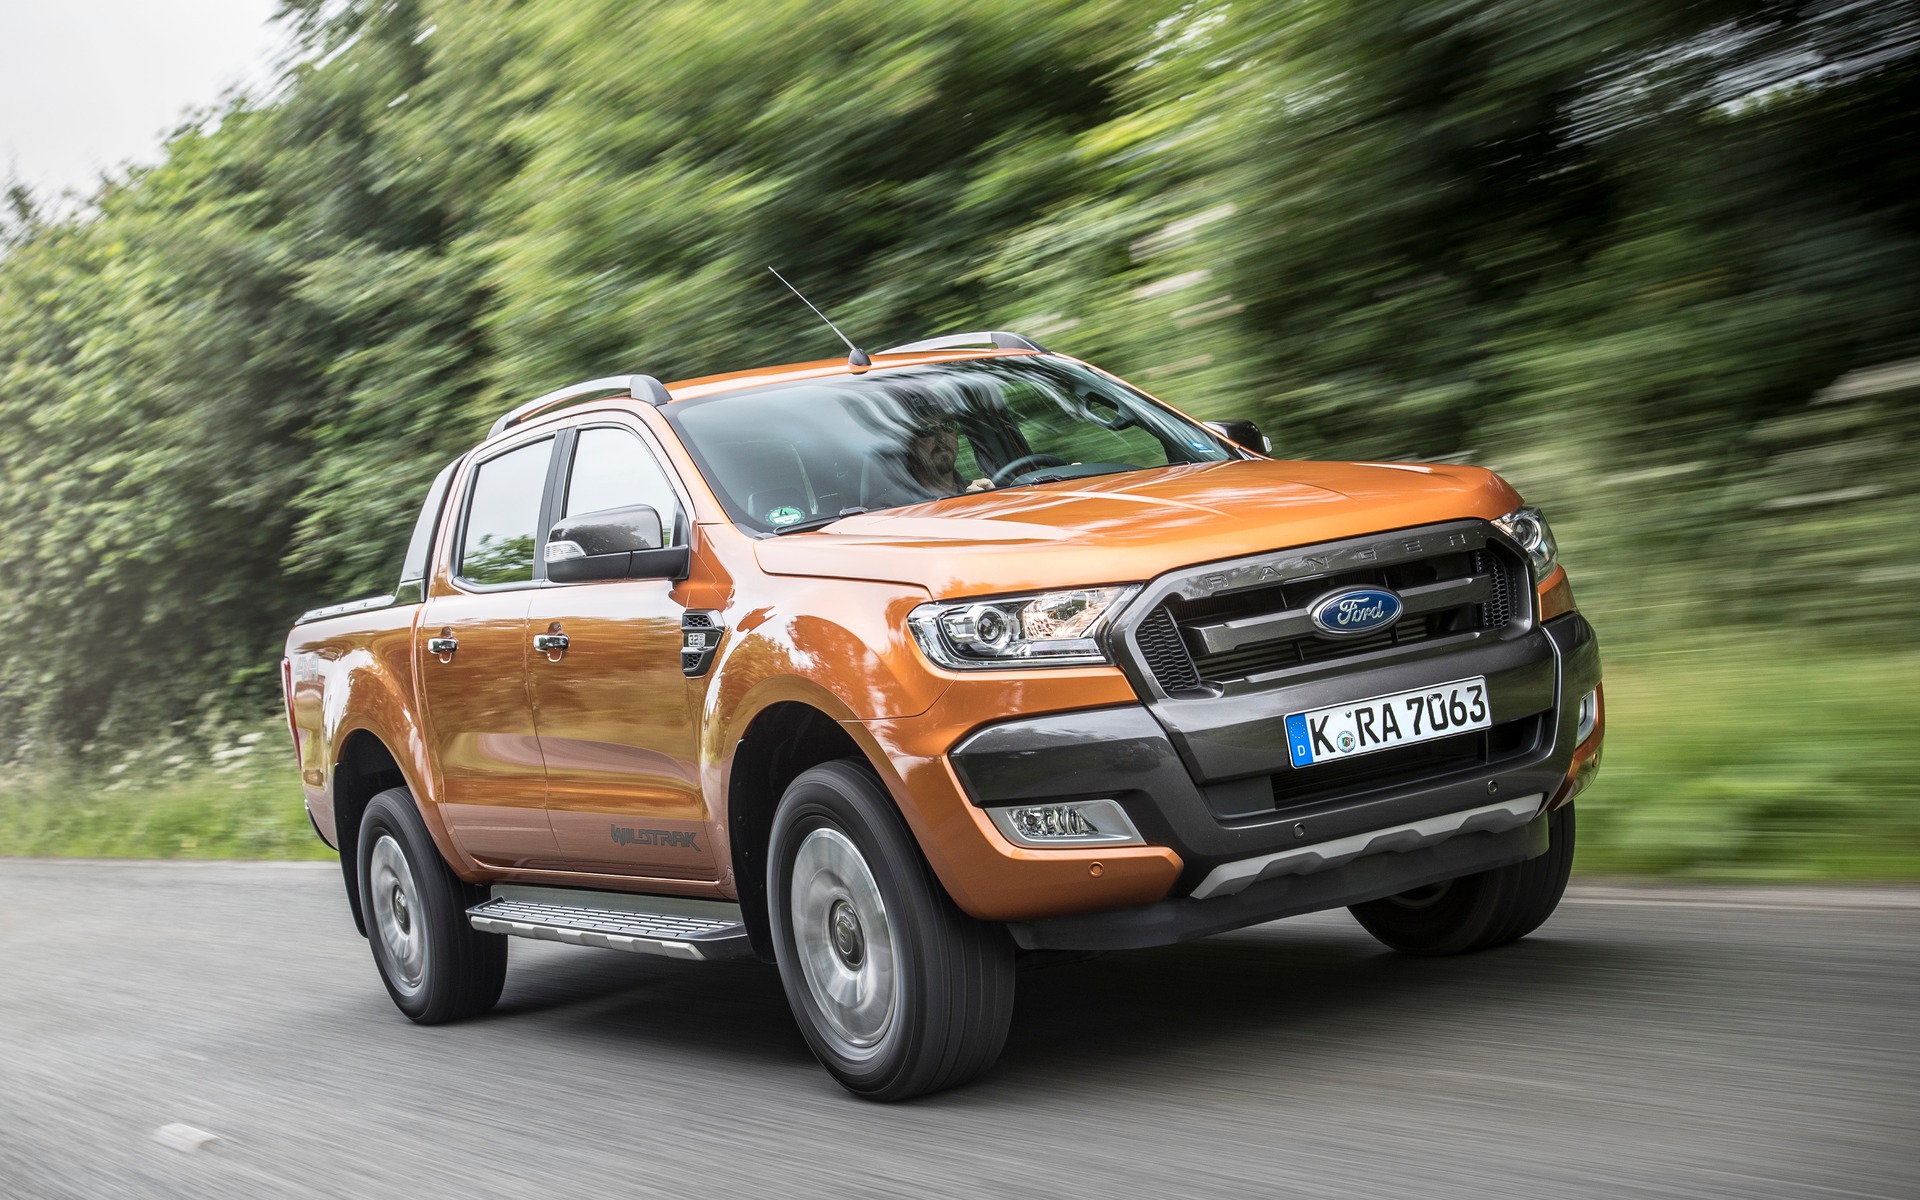 The current Ford Ranger sold elsewhere in the world.